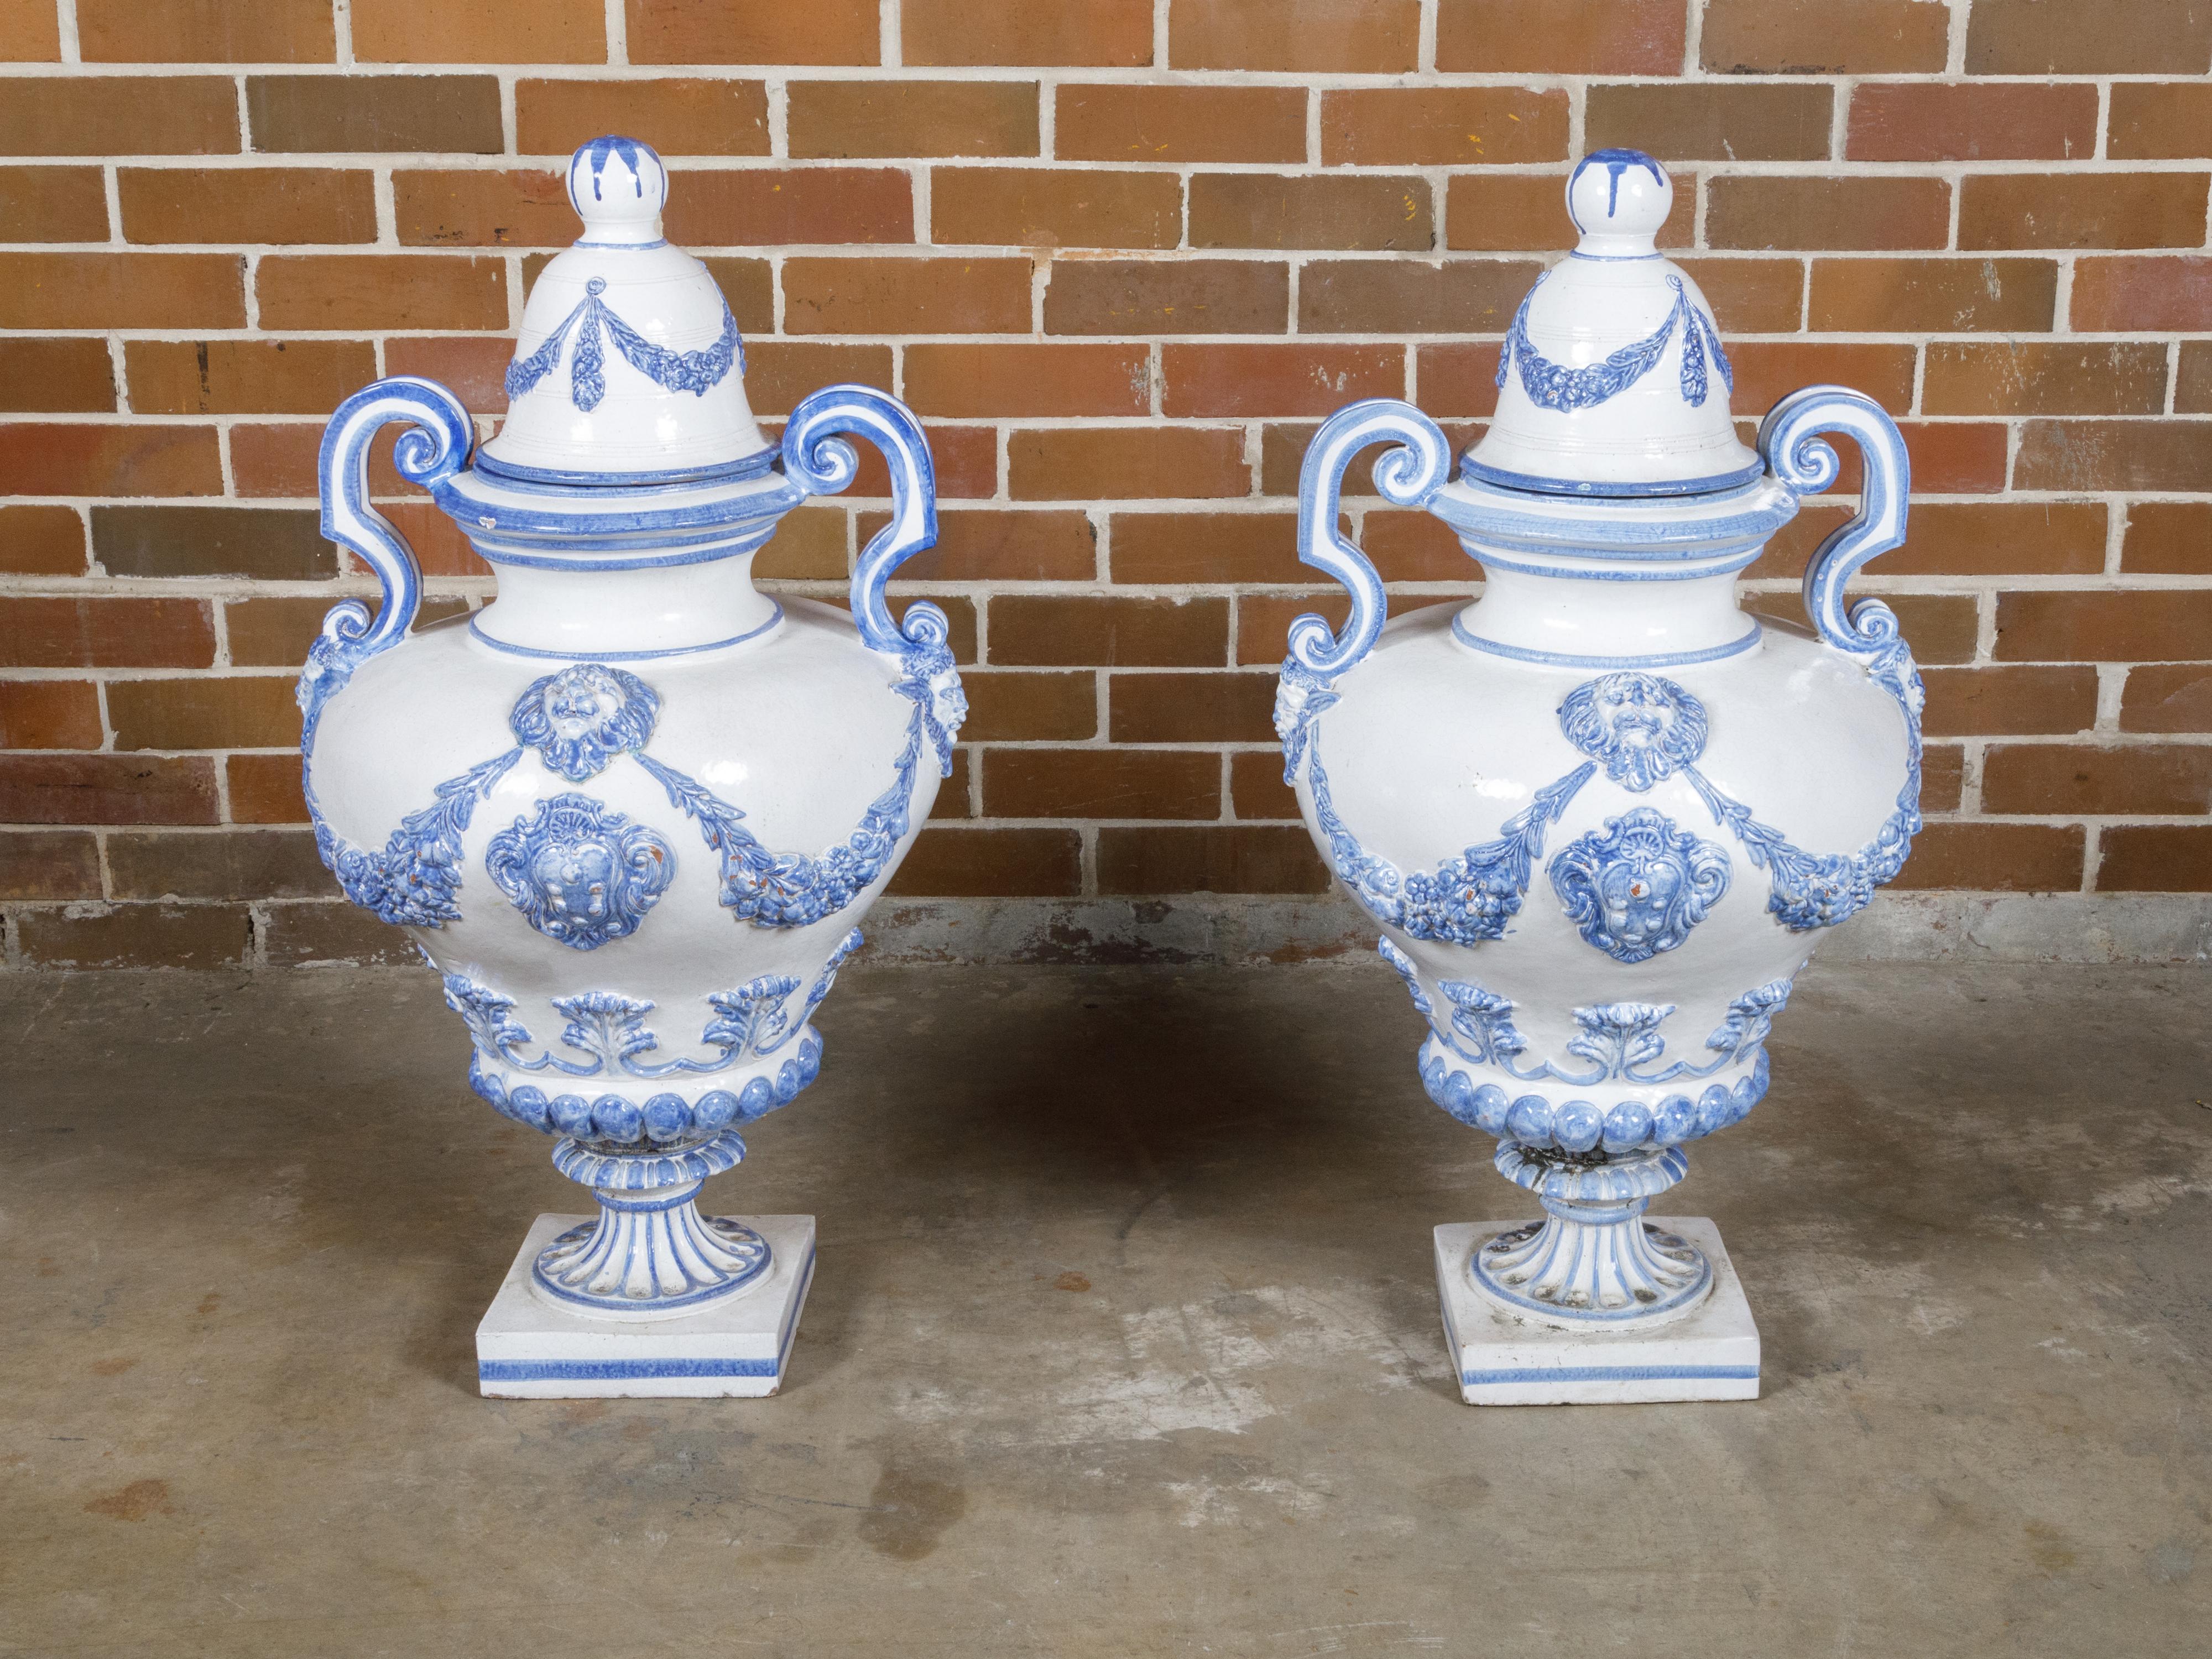 A pair of Italian Turn of the century blue and white faience lidded jars from circa 1900 with faun motifs, volute handles, heraldic shields and lions. This exquisite pair of Italian faience lidded jars, dating back to the turn of the century circa